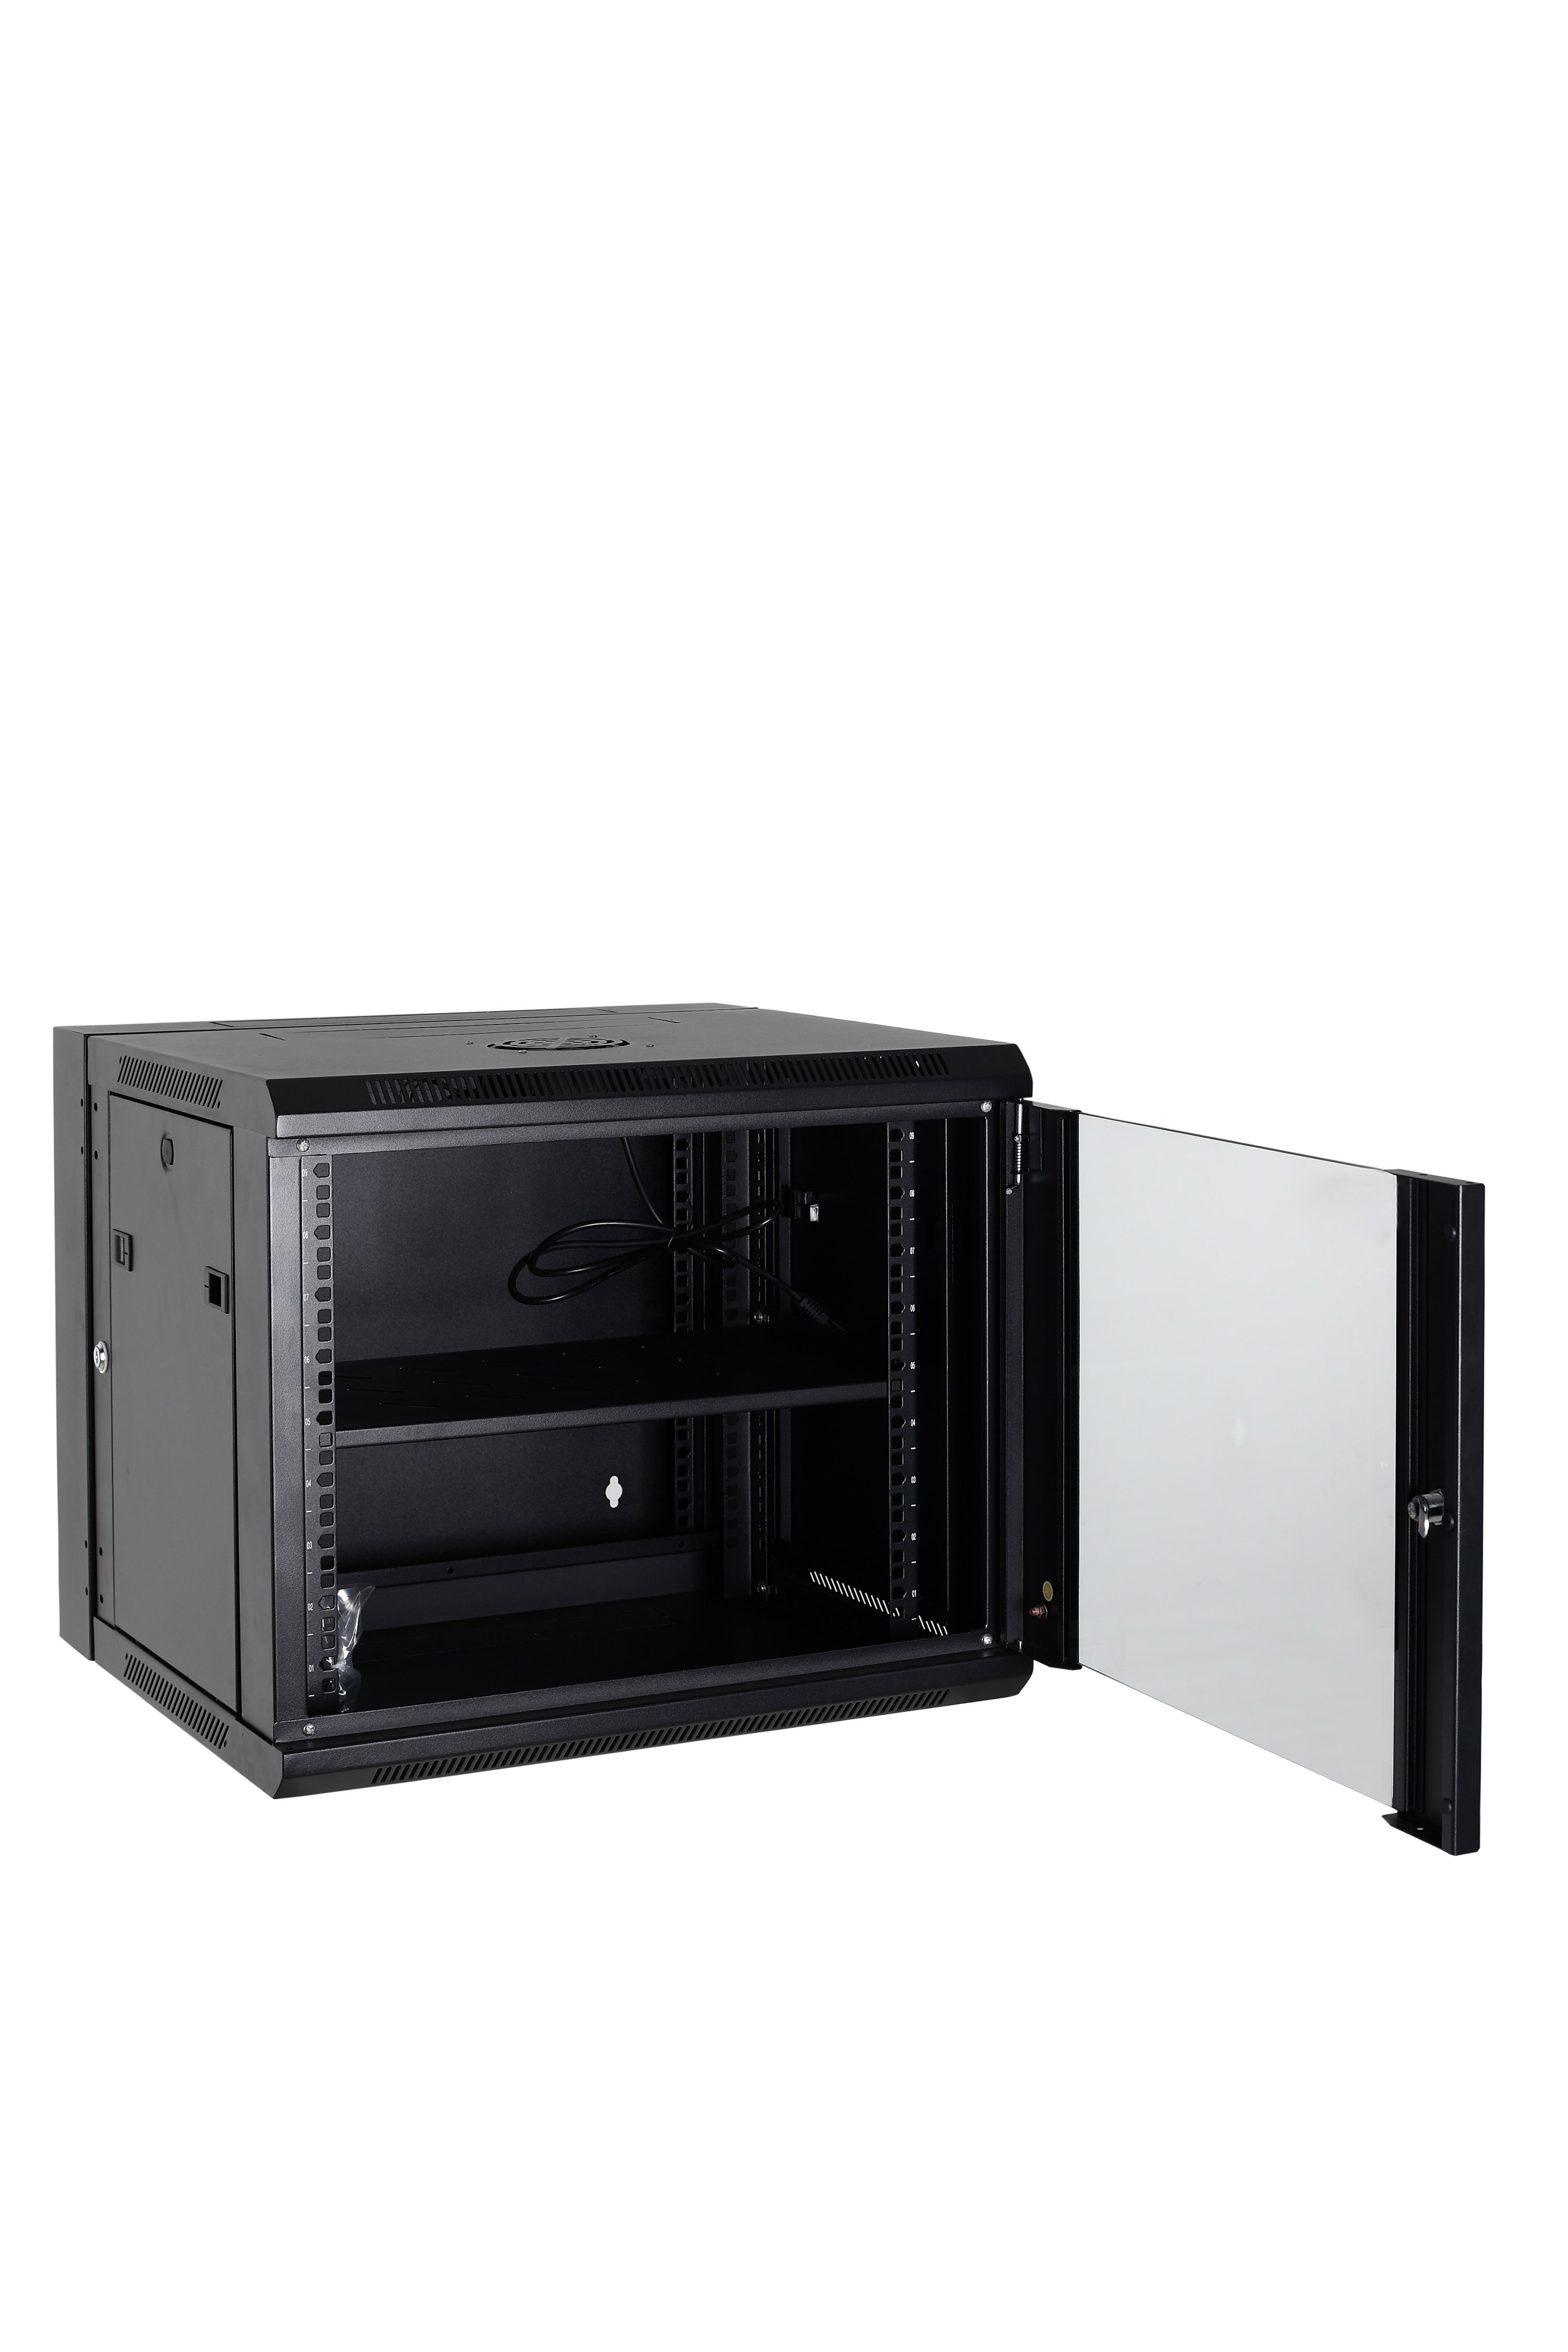 19 Inch Wall Mount Network Cabinets, Glass Door, Black Or Grey Color, SPCC Material, Double Section